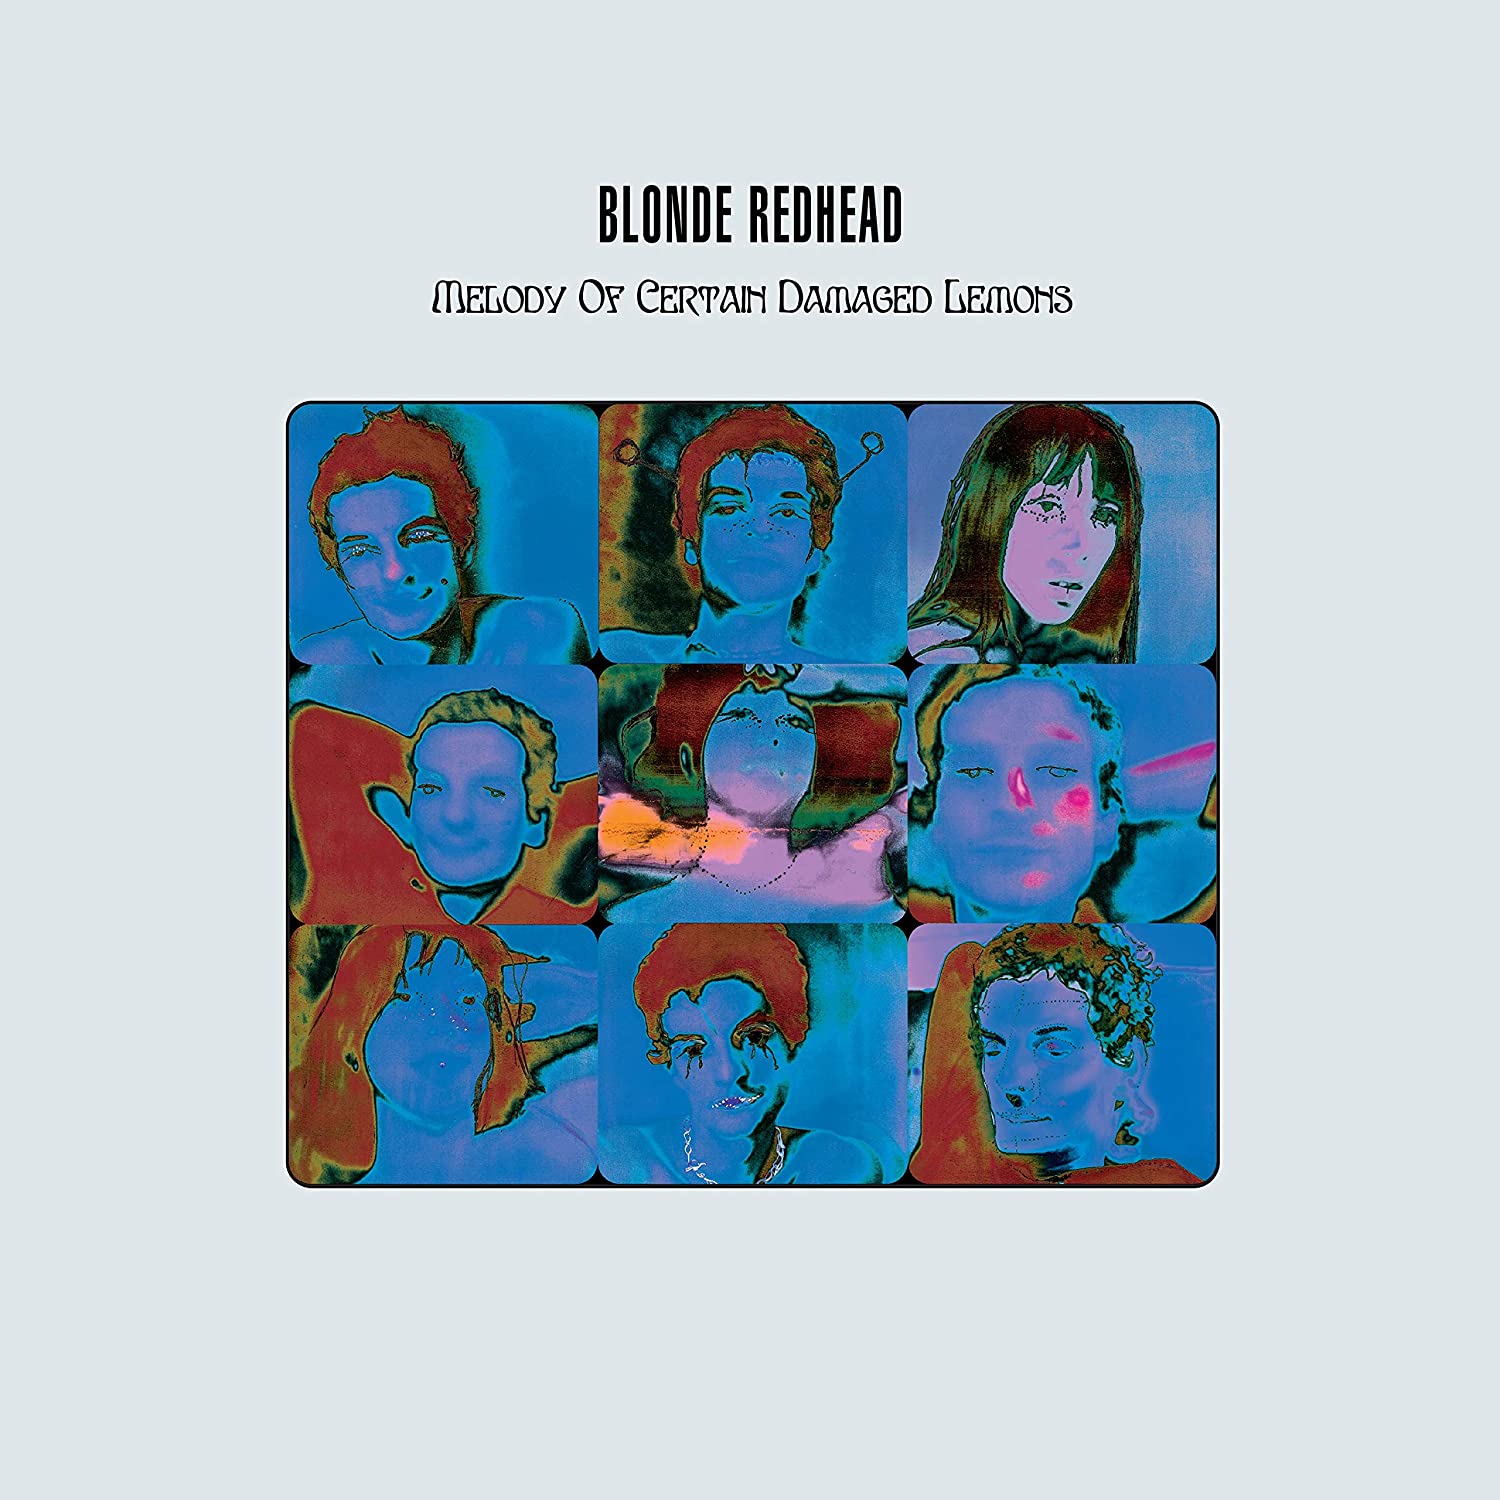 BLONDE REDHEAD - Melody of Certain Damaged Lemons (20th Anniversary) - LP - Limited Opaque Pink Vinyl